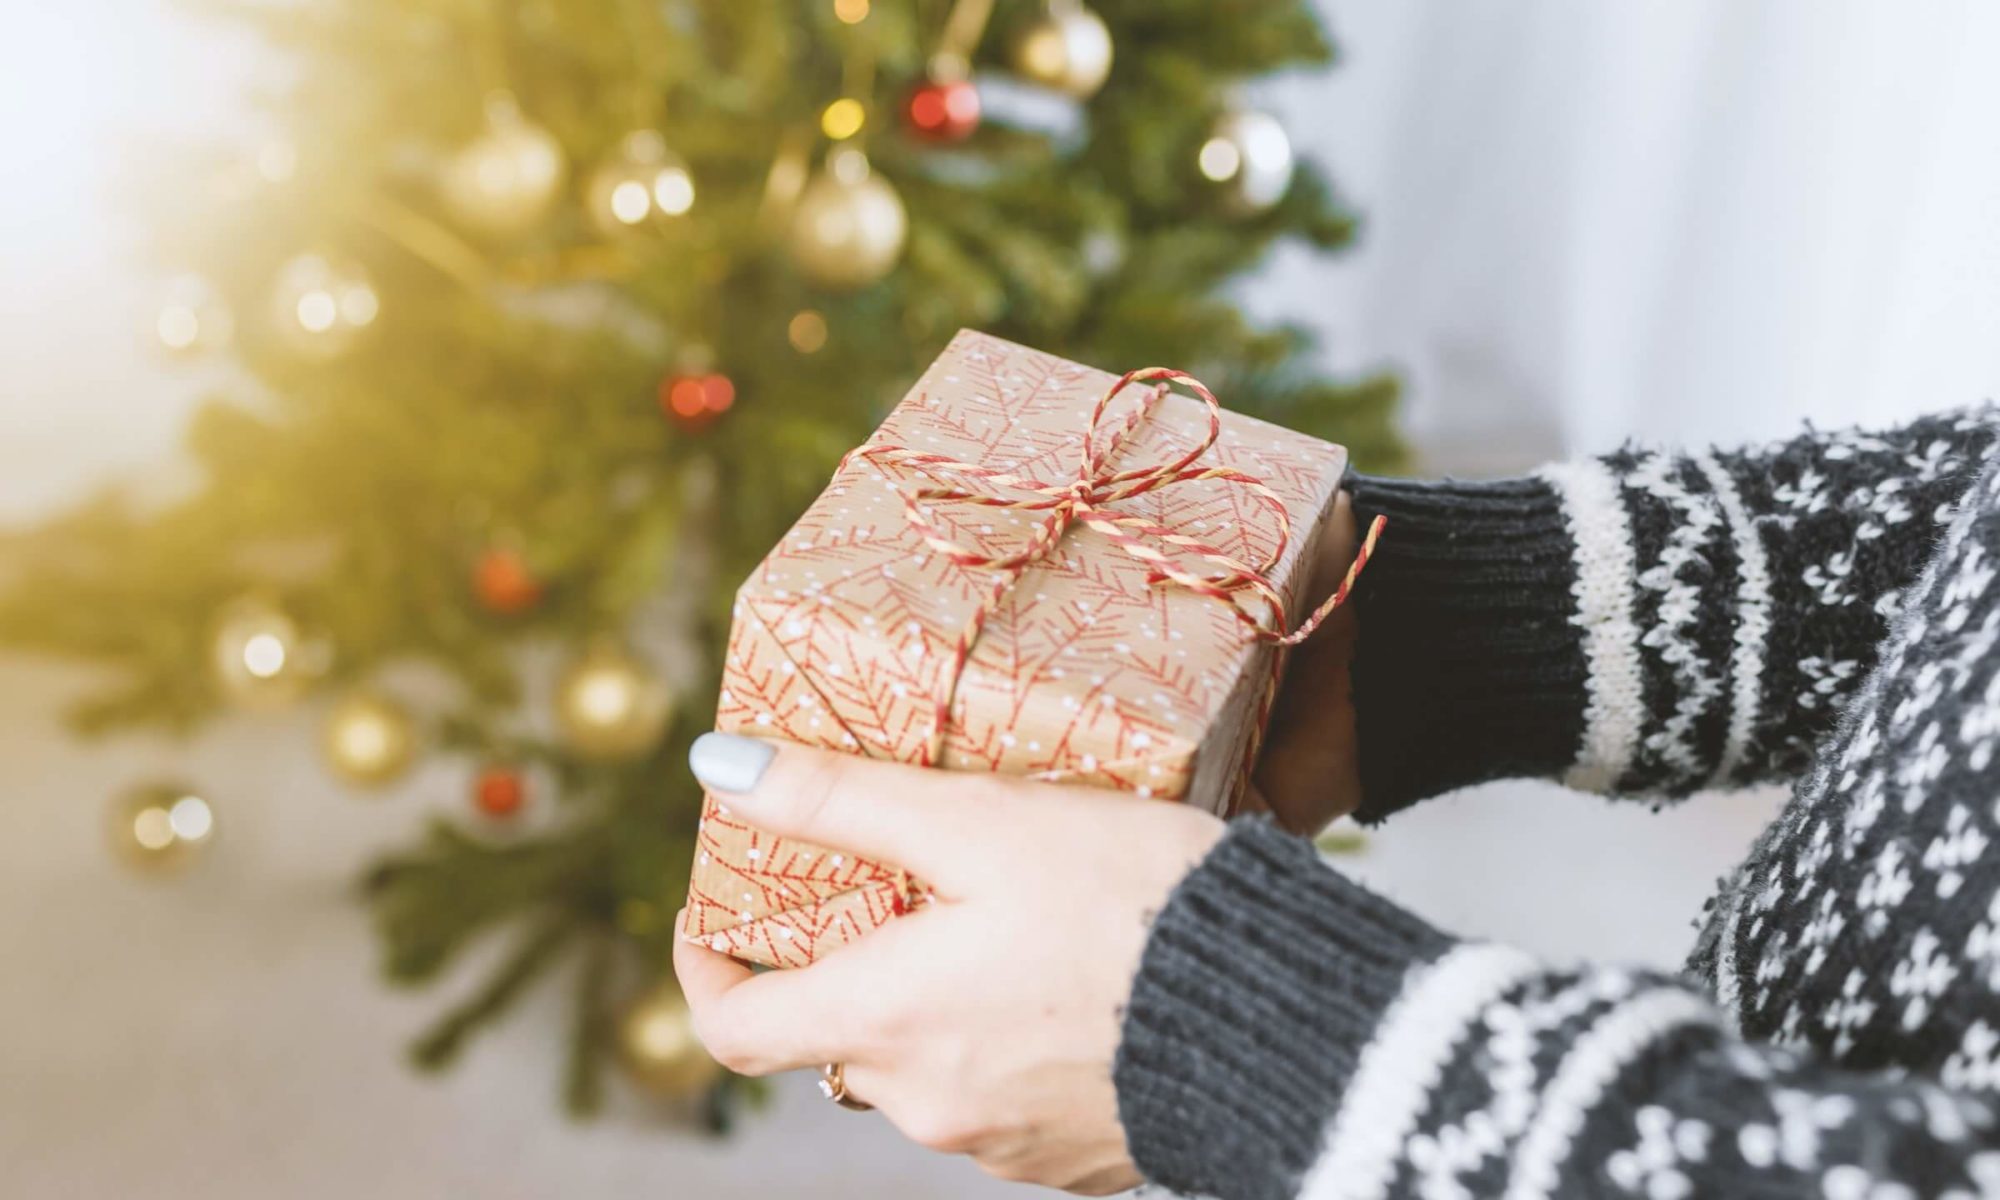 Minimalist gift guide: gift ideas for minimalists